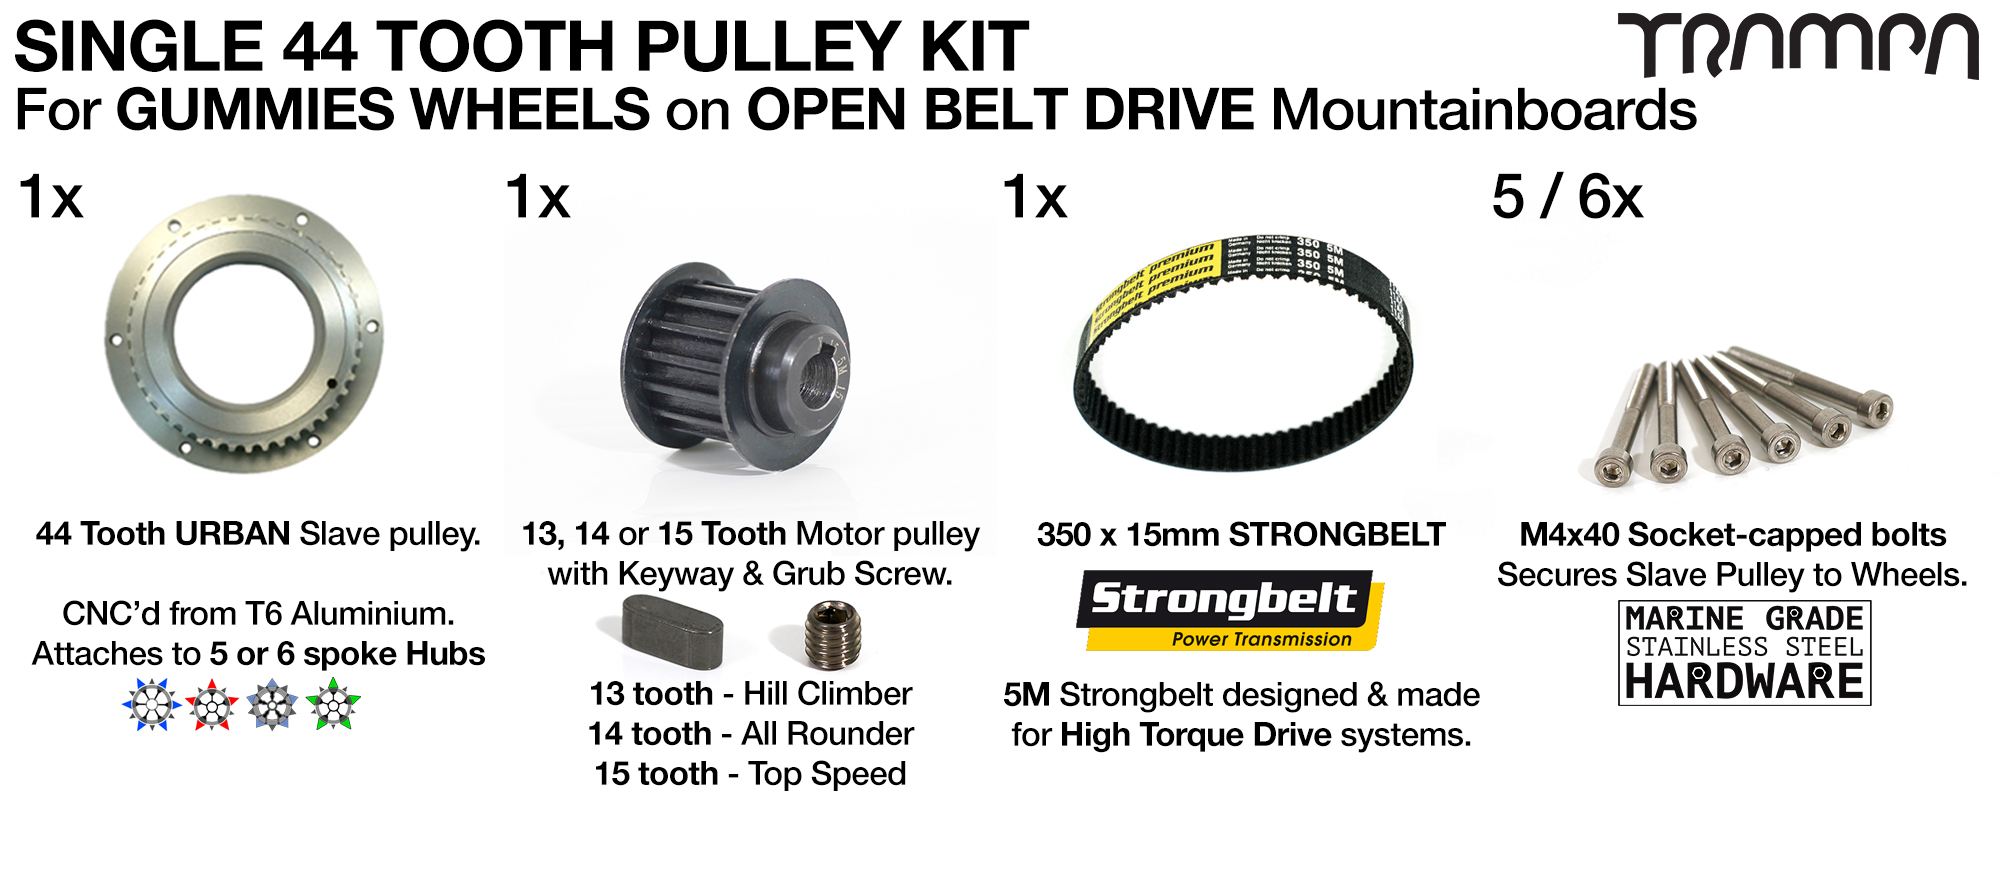 66T Open Belt Drive  Pulley Kit with 350mm x 15mm Belt for 5 Inch GUMMIES Wheels using 44 Tooth Slave